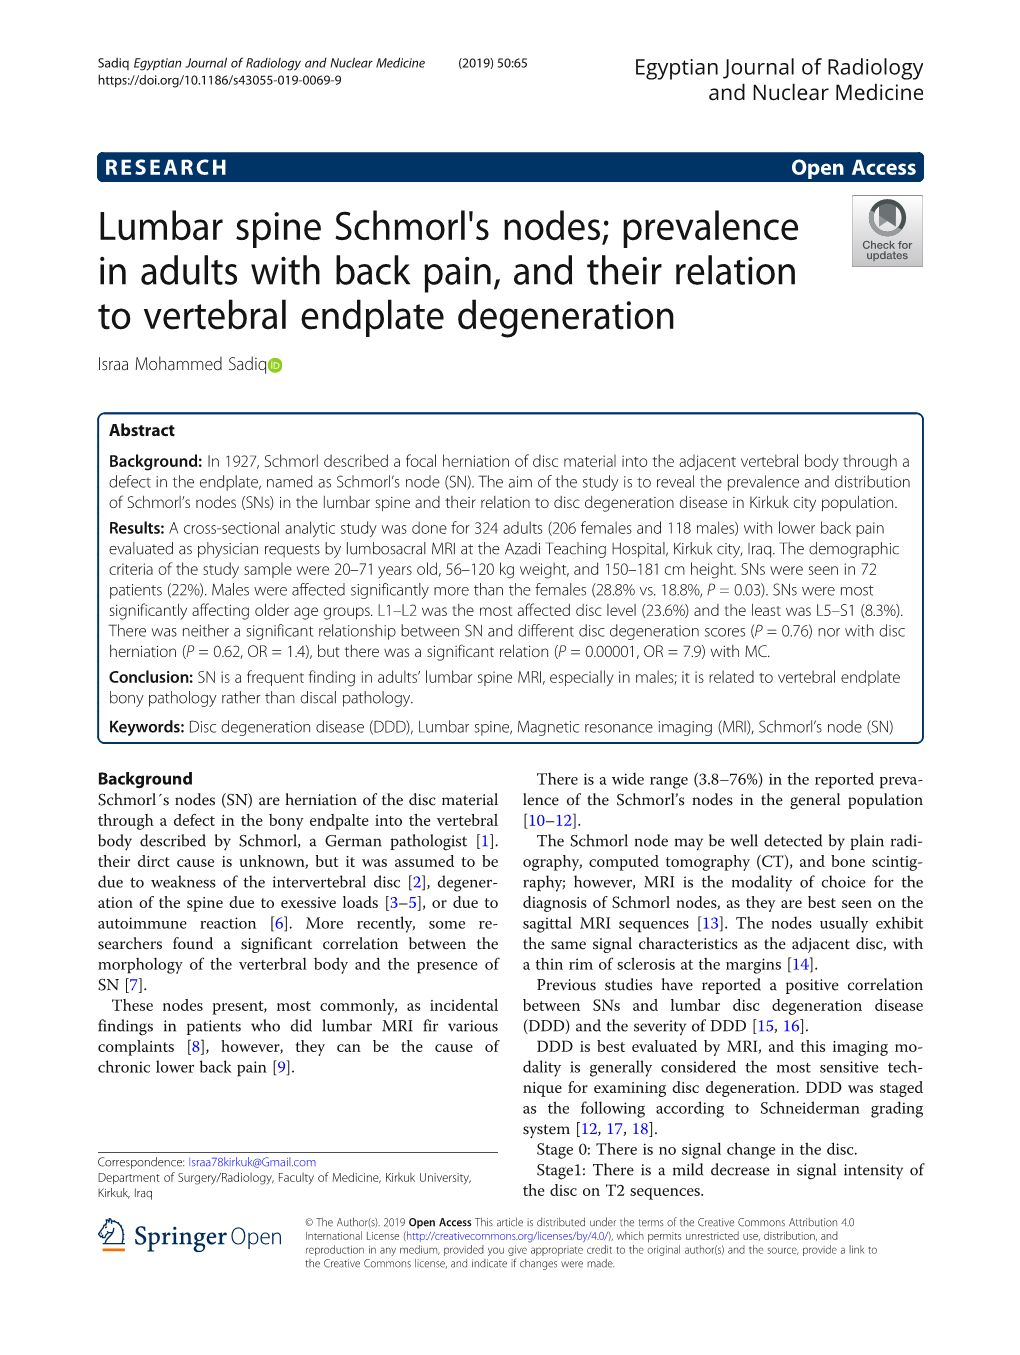 Lumbar Spine Schmorl's Nodes; Prevalence in Adults with Back Pain, and Their Relation to Vertebral Endplate Degeneration Israa Mohammed Sadiq